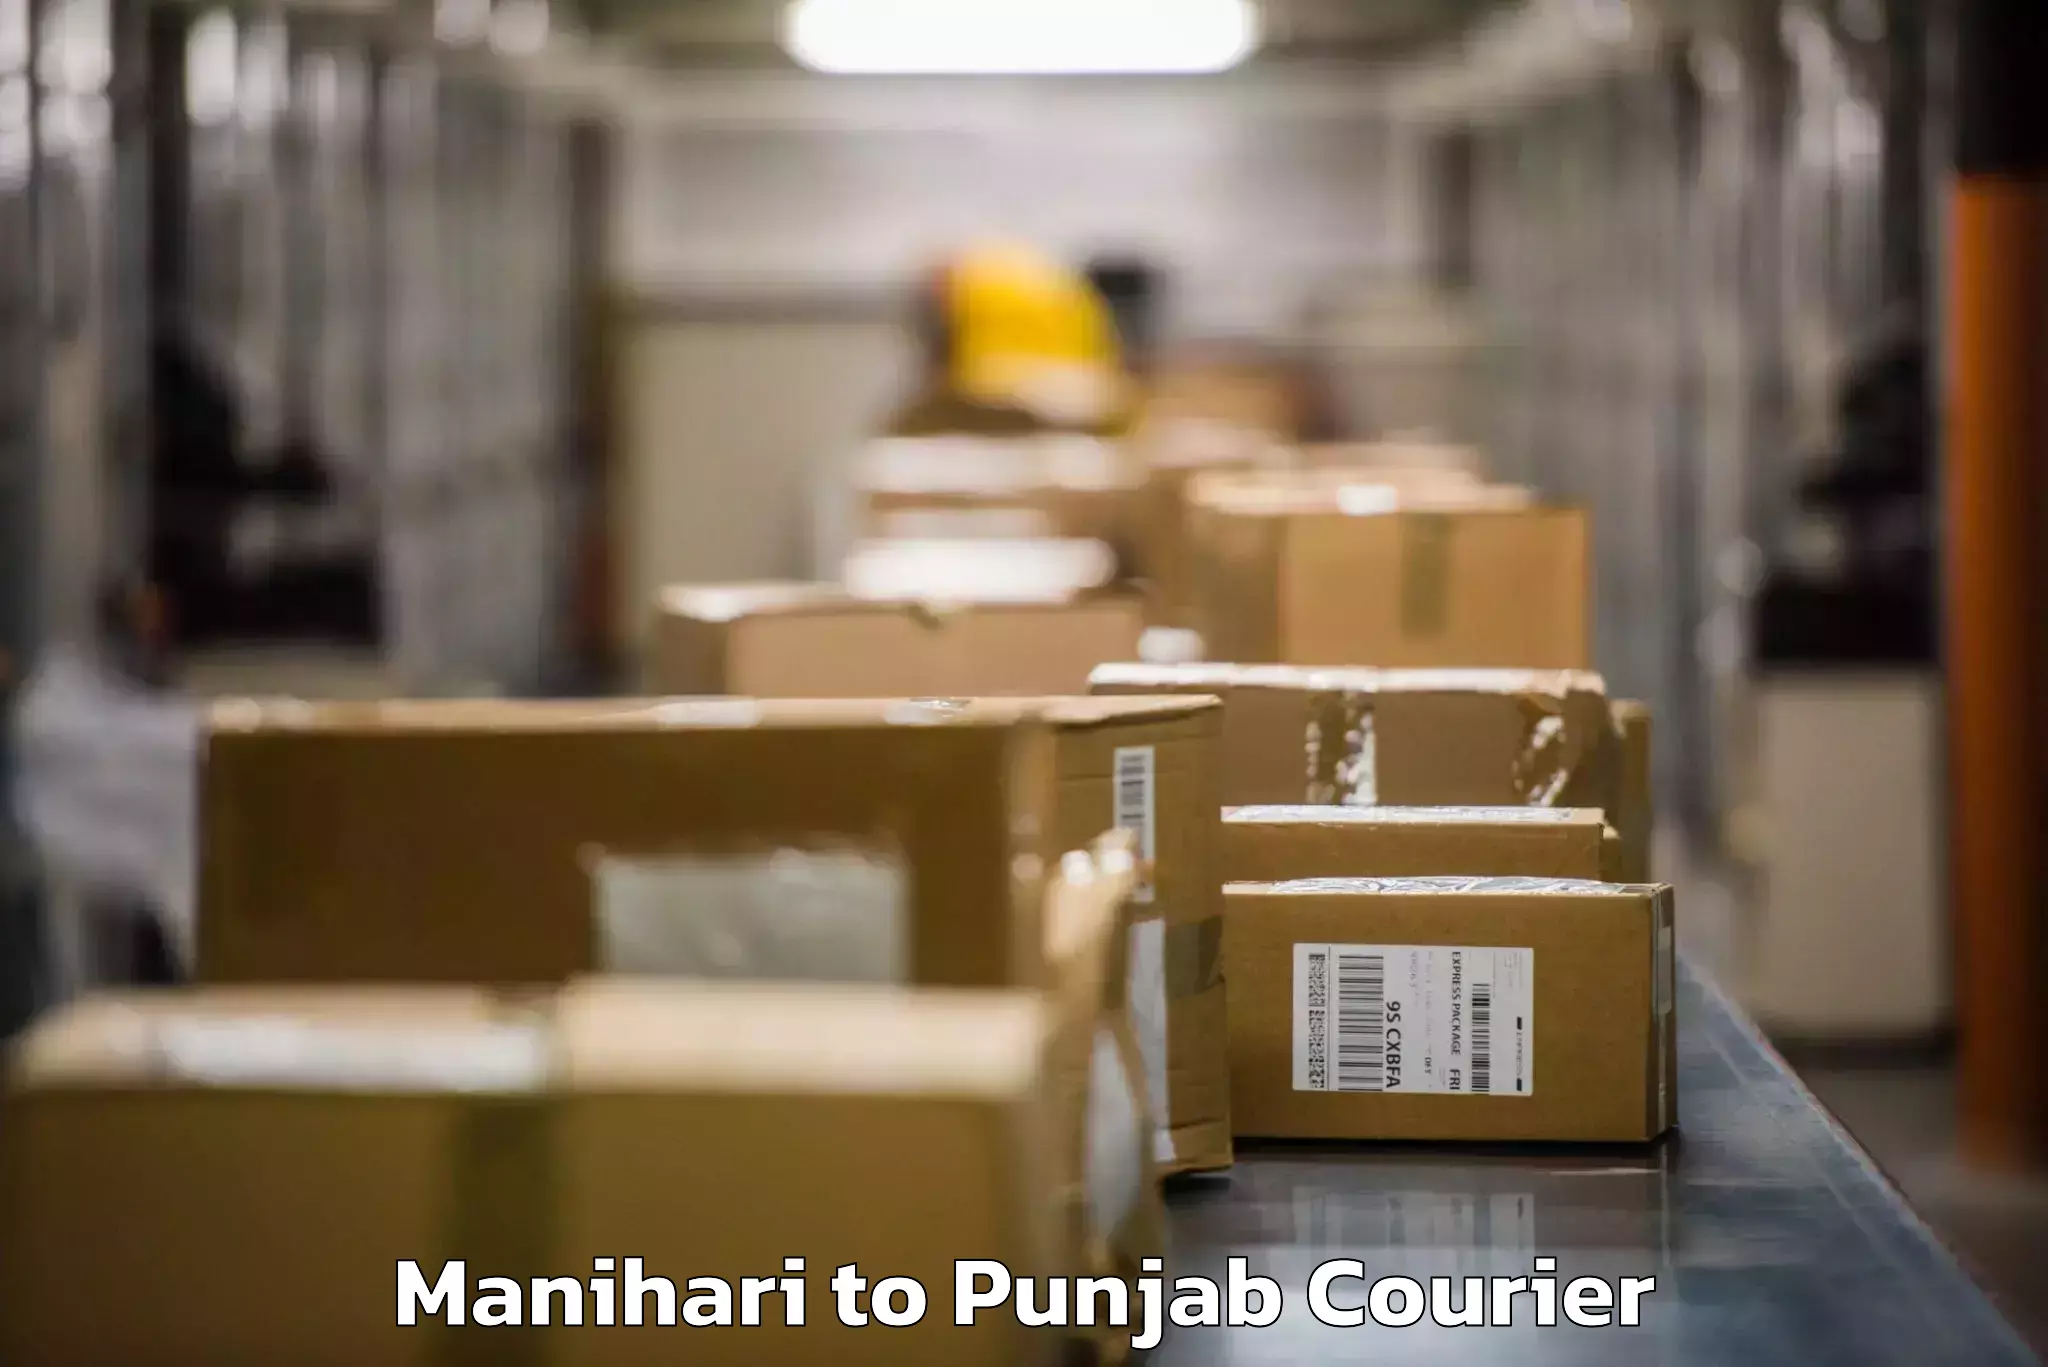 Personal effects shipping in Manihari to Jalandhar